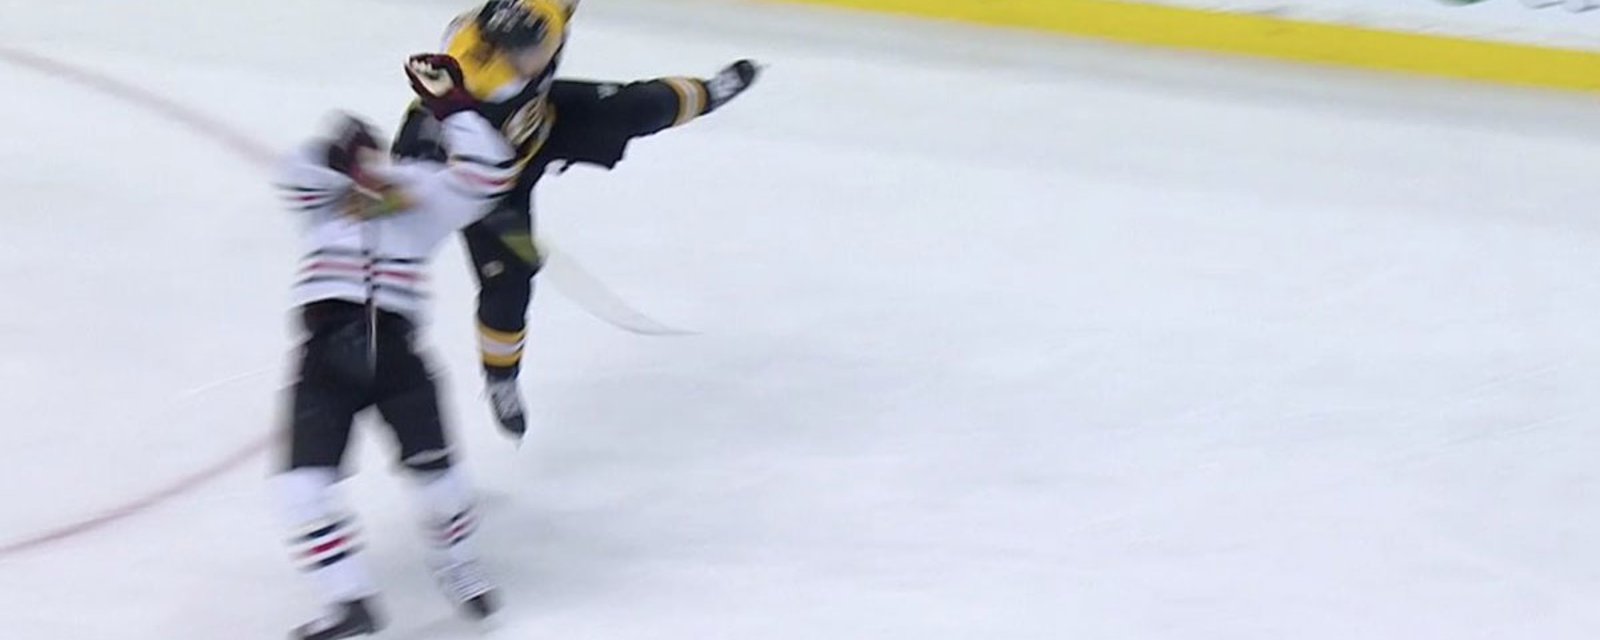 BREAKING: Duclair goes down following controversial hit from Brad Marchand